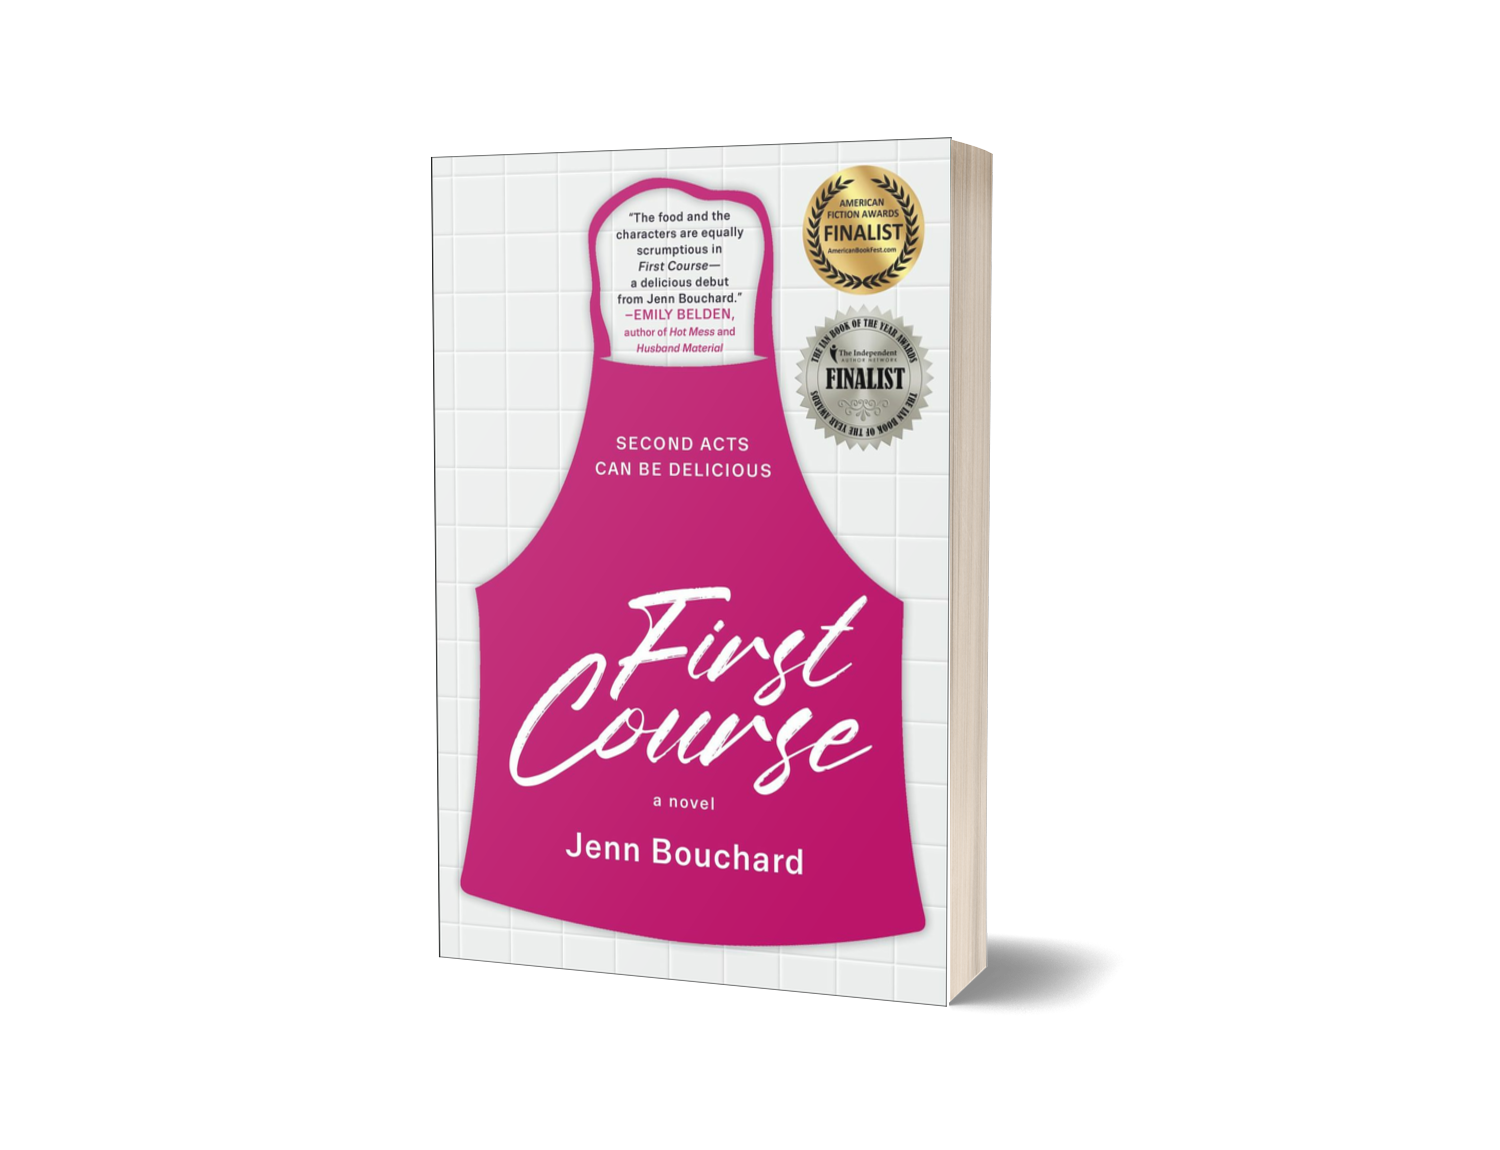 book cover of First Course with bright pink apron